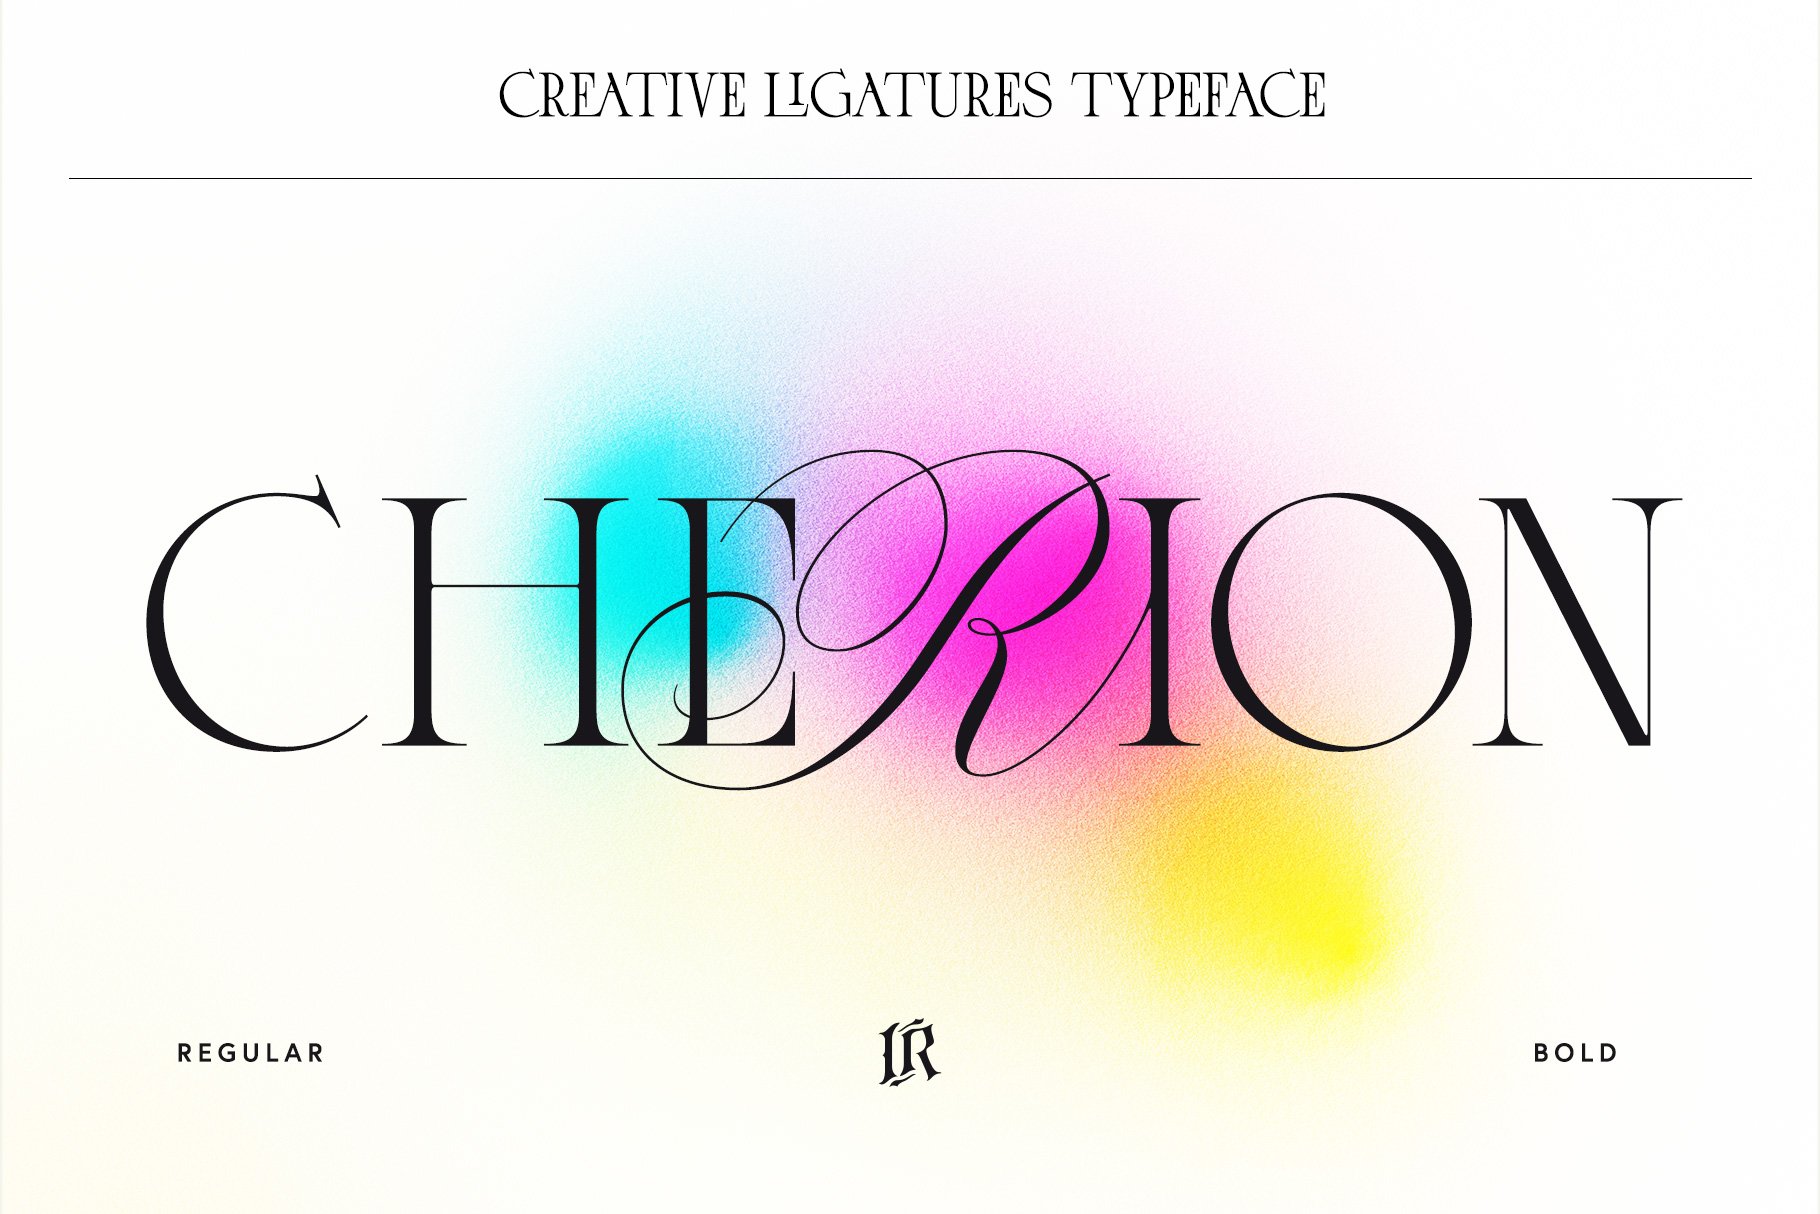 Cherion Typeface cover image.